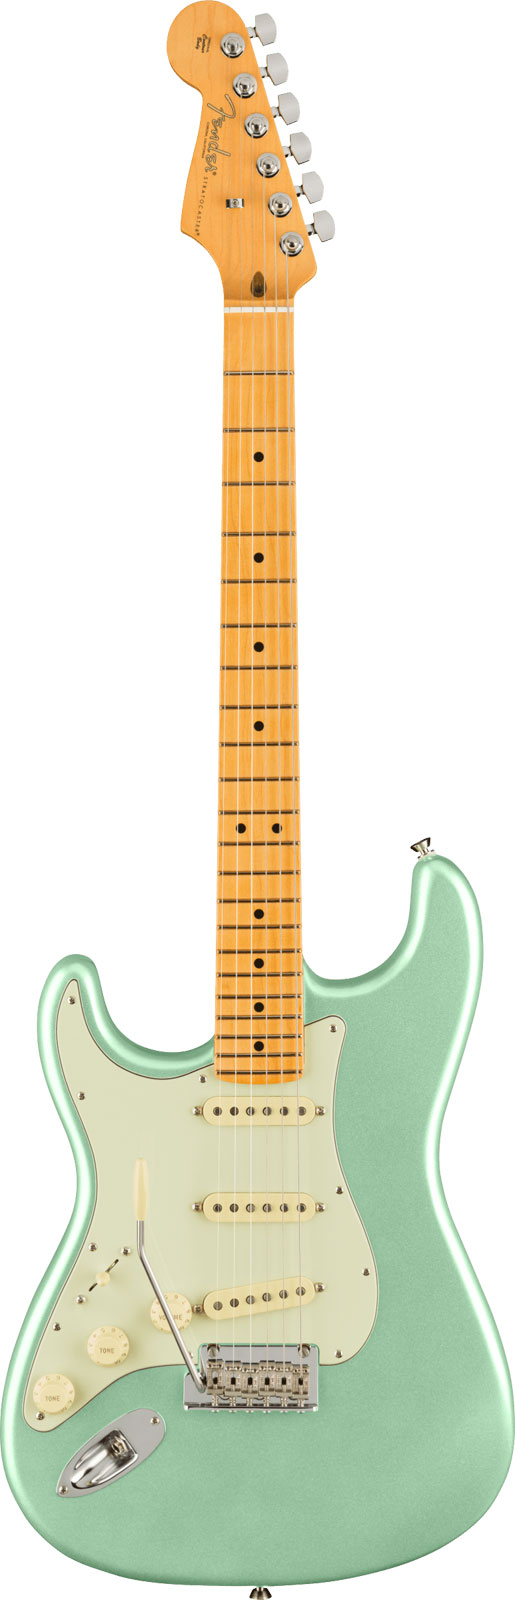 FENDER AMERICAN PROFESSIONAL II STRATOCASTER LH MN, MYSTIC SURF GREEN